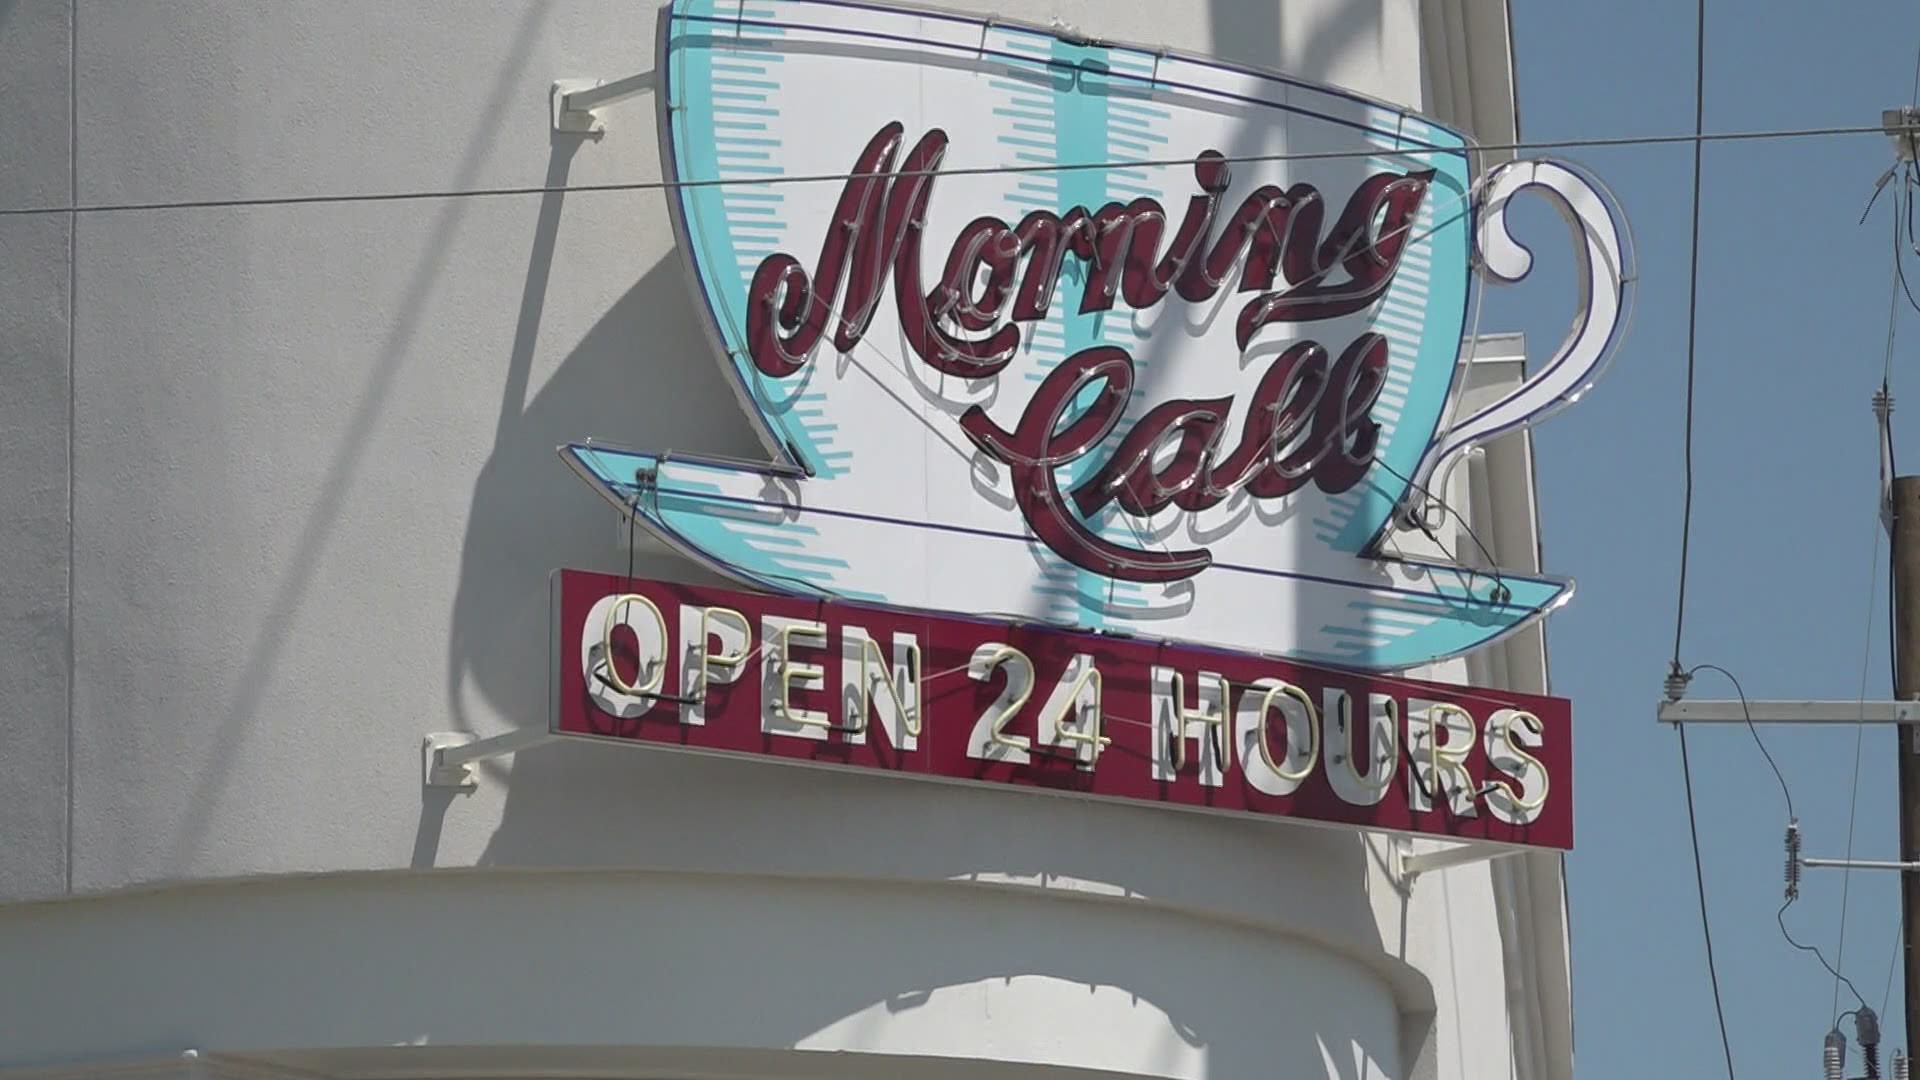 The original Morning Call opened about 150 years ago, but was nearly just a memory after closing both its Metairie and City Park locations a few years ago.